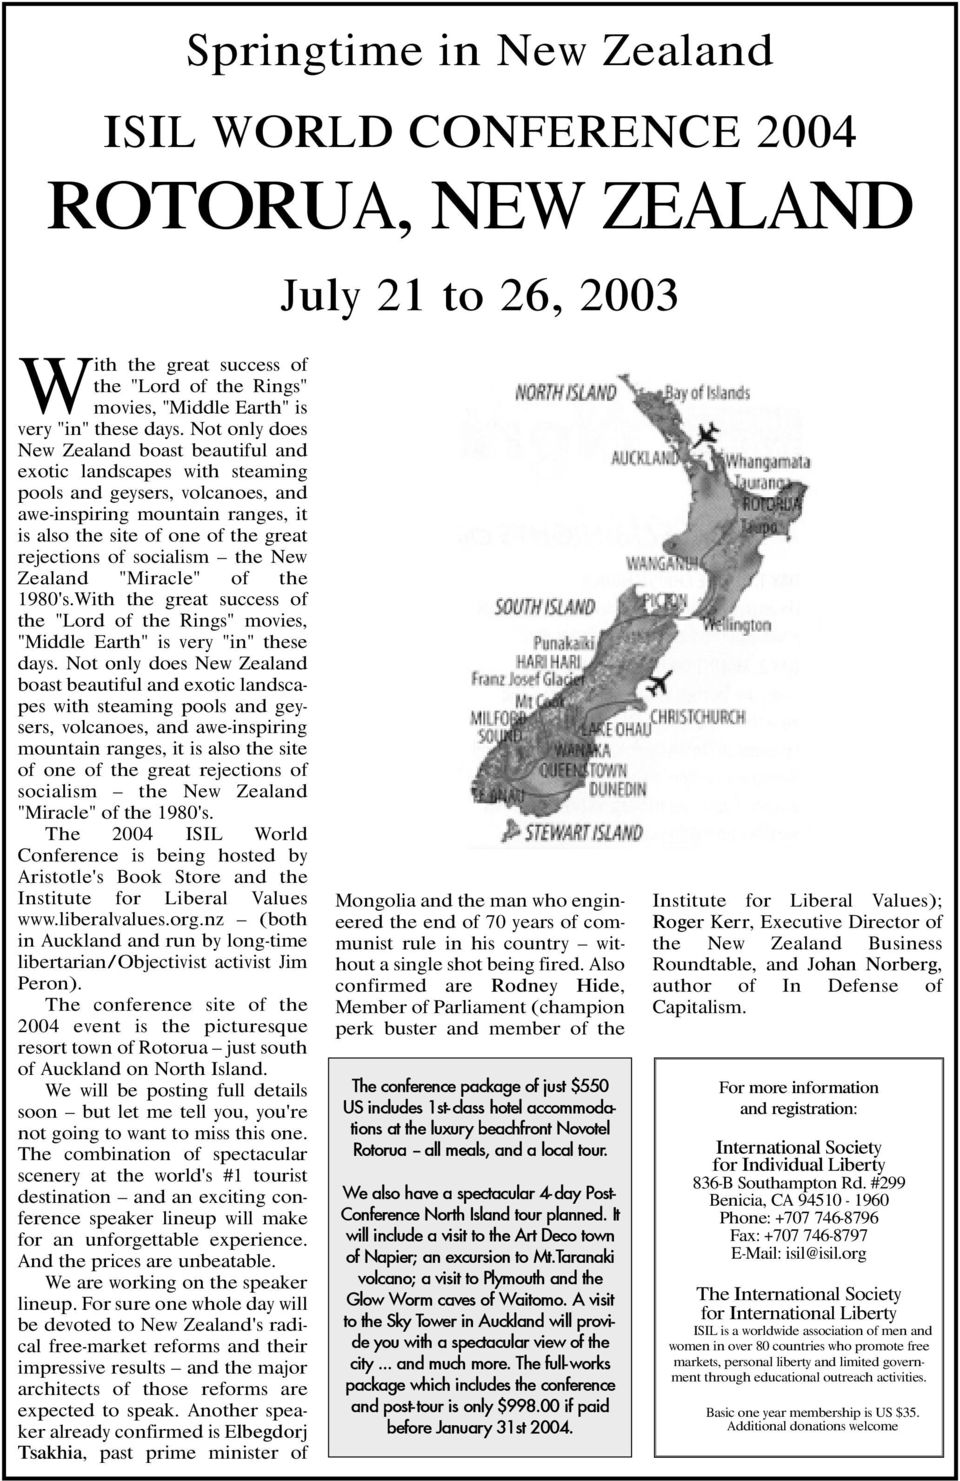 socialism the New Zealand "Miracle" of the 1980's.With the great success of the "Lord of the Rings" movies, "Middle Earth" is very "in" these days.  socialism the New Zealand "Miracle" of the 1980's.